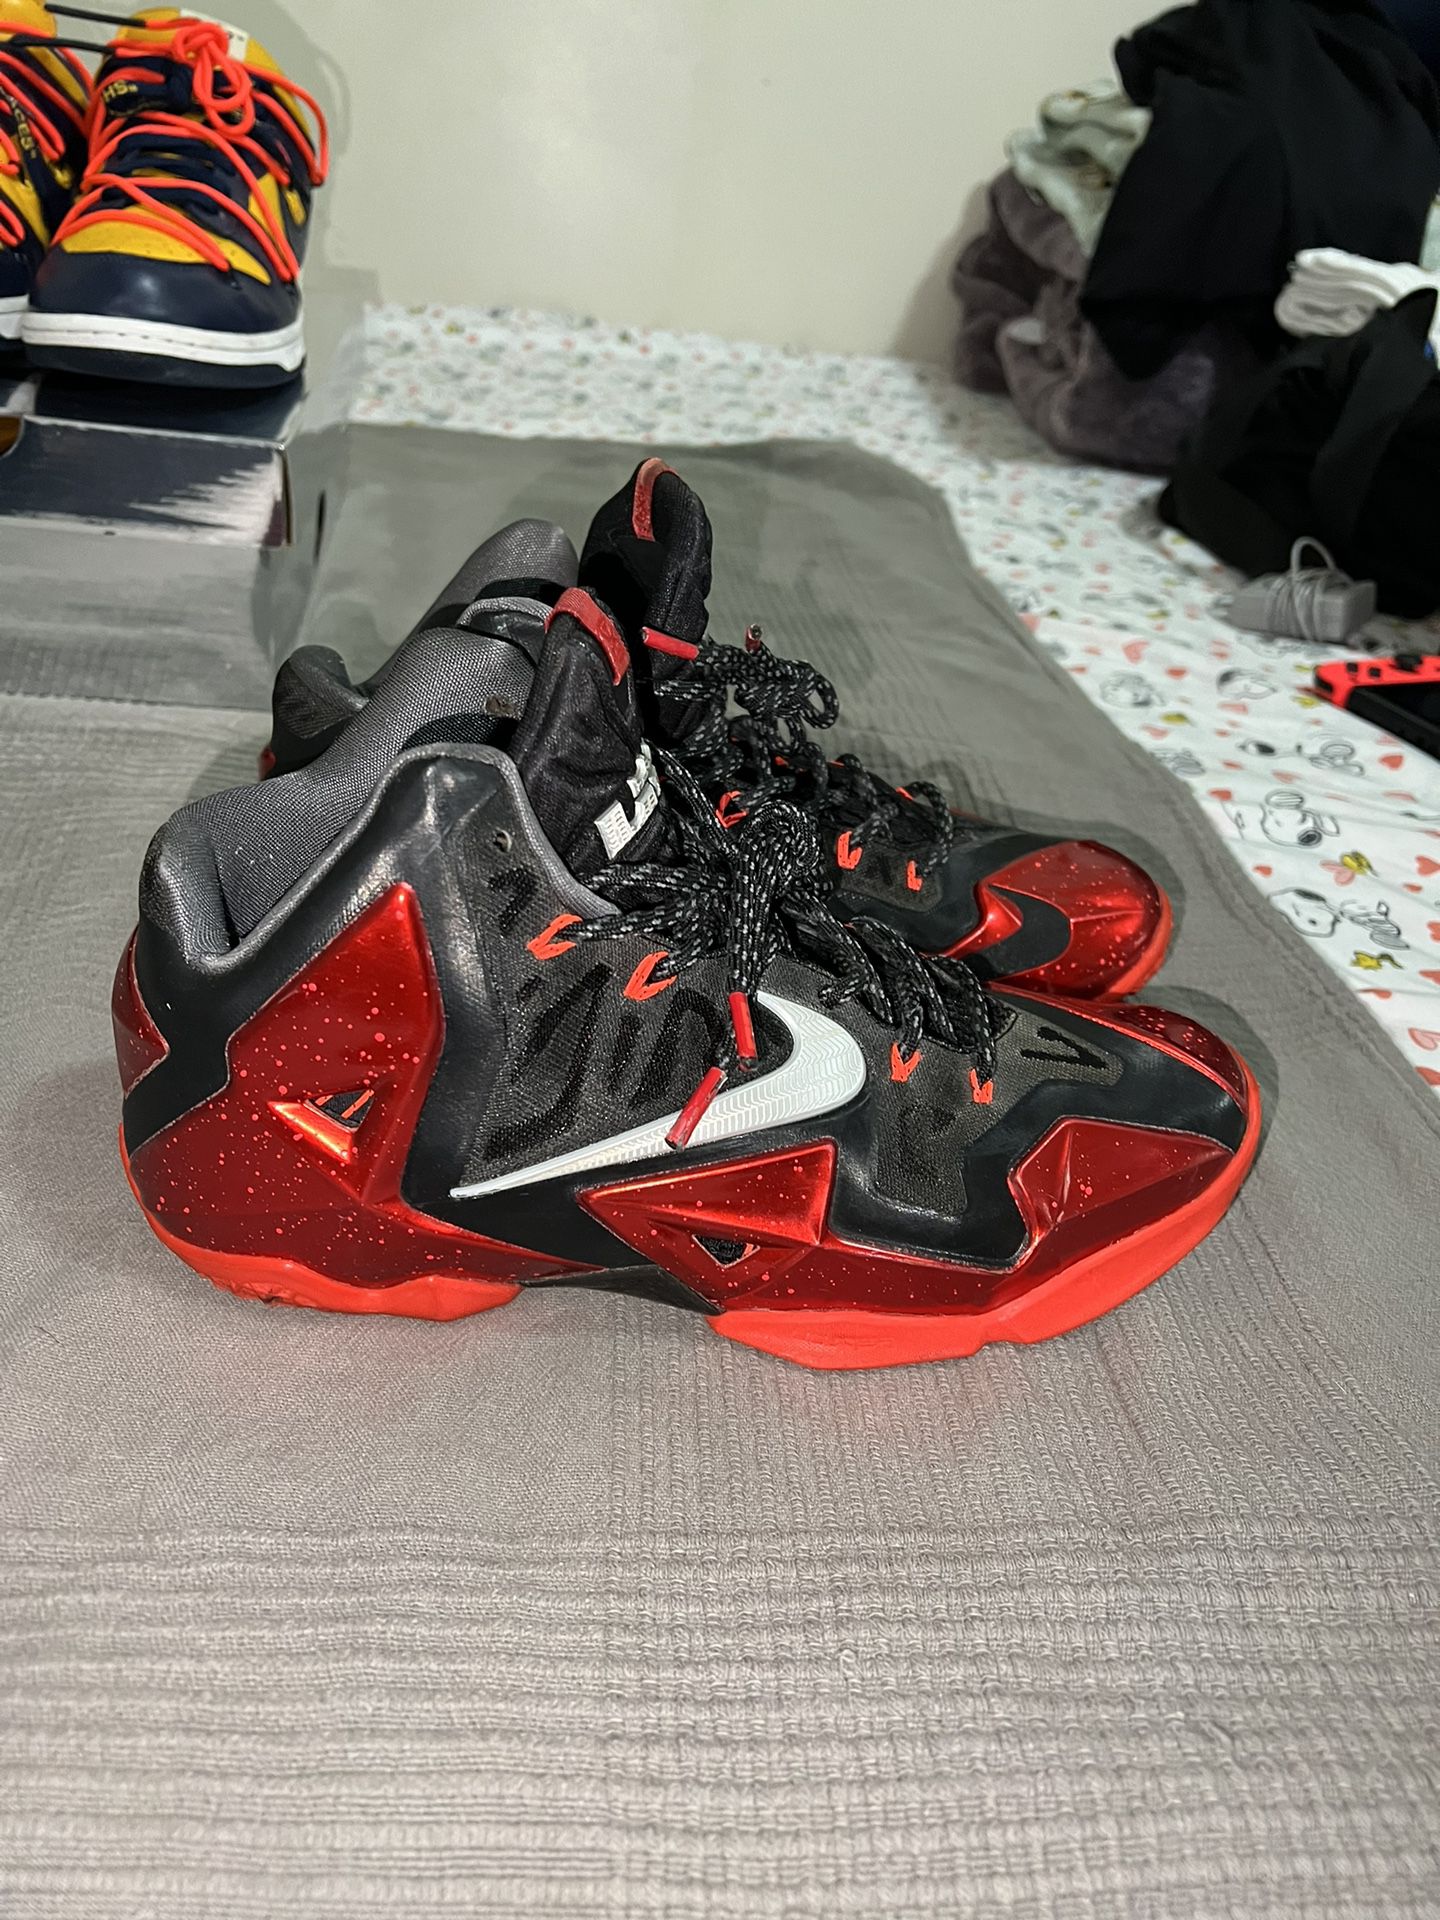 Lebron 11 9 for Sale Bronx, NY - OfferUp